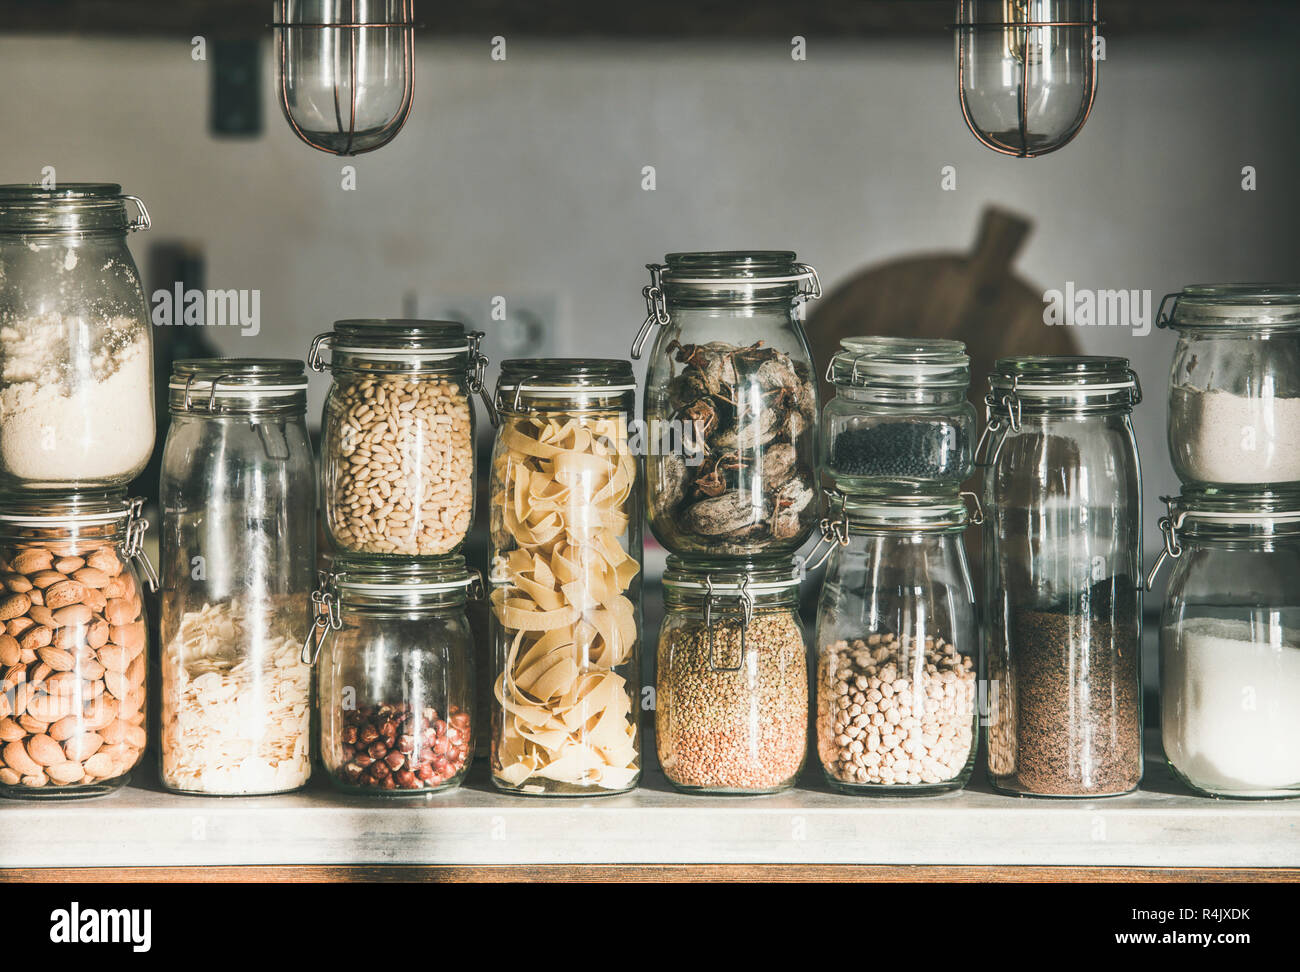 Rustic kitchen food storage arrangement. Various grains, cereals, nuts, dry fruit, flour and pasta kinds in glass jars over concrete kitchen counter. Stock Photo